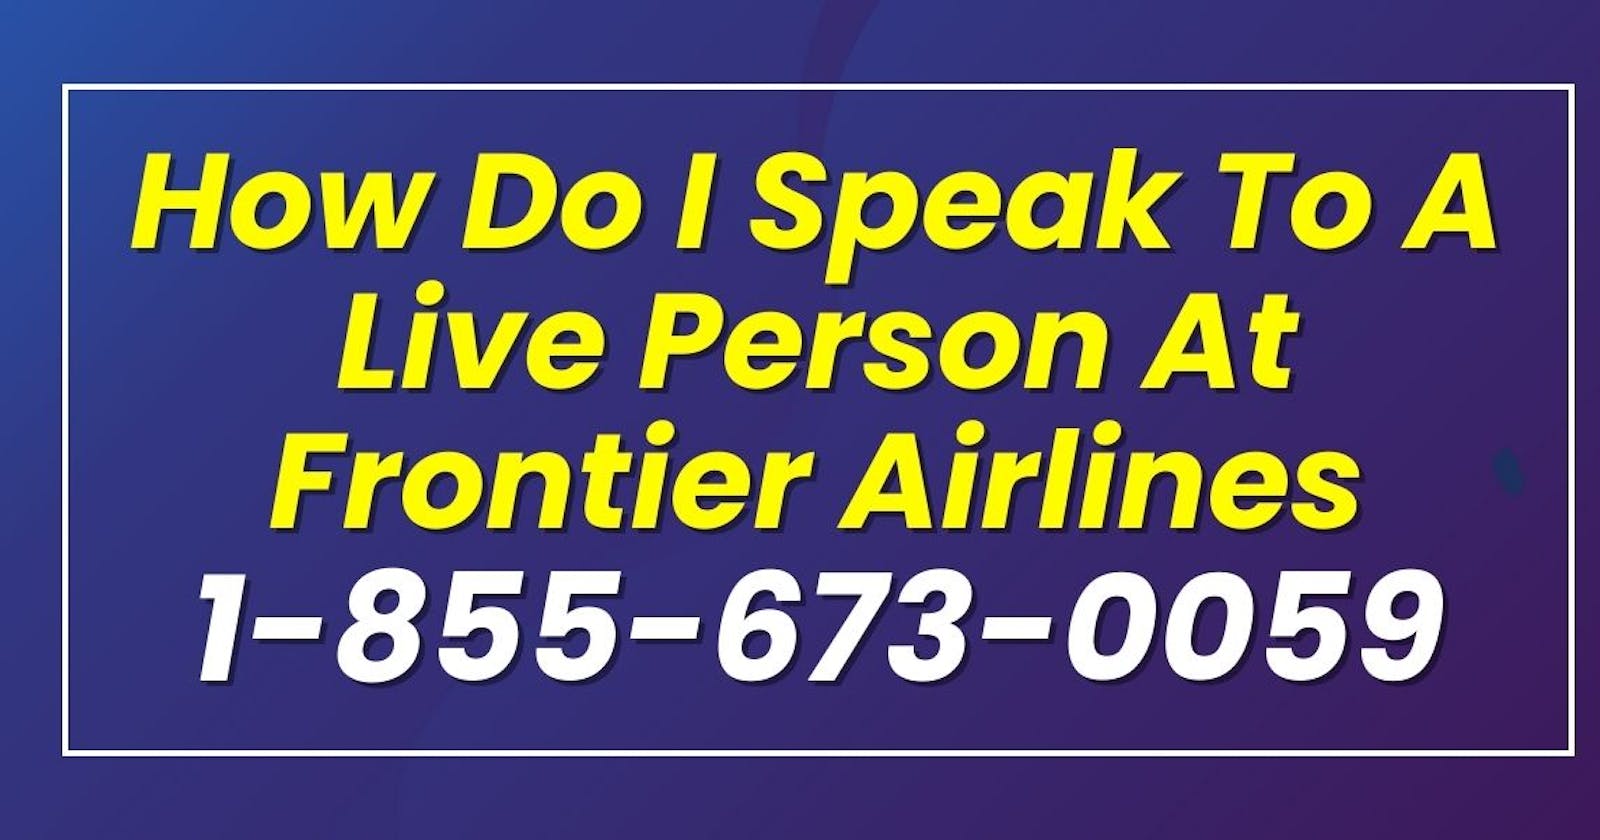 How Do I Speak to a Person at Frontier Airlines? - Dial +1-855-673-0059 or +1-866-884-0658 (24/7 access!)